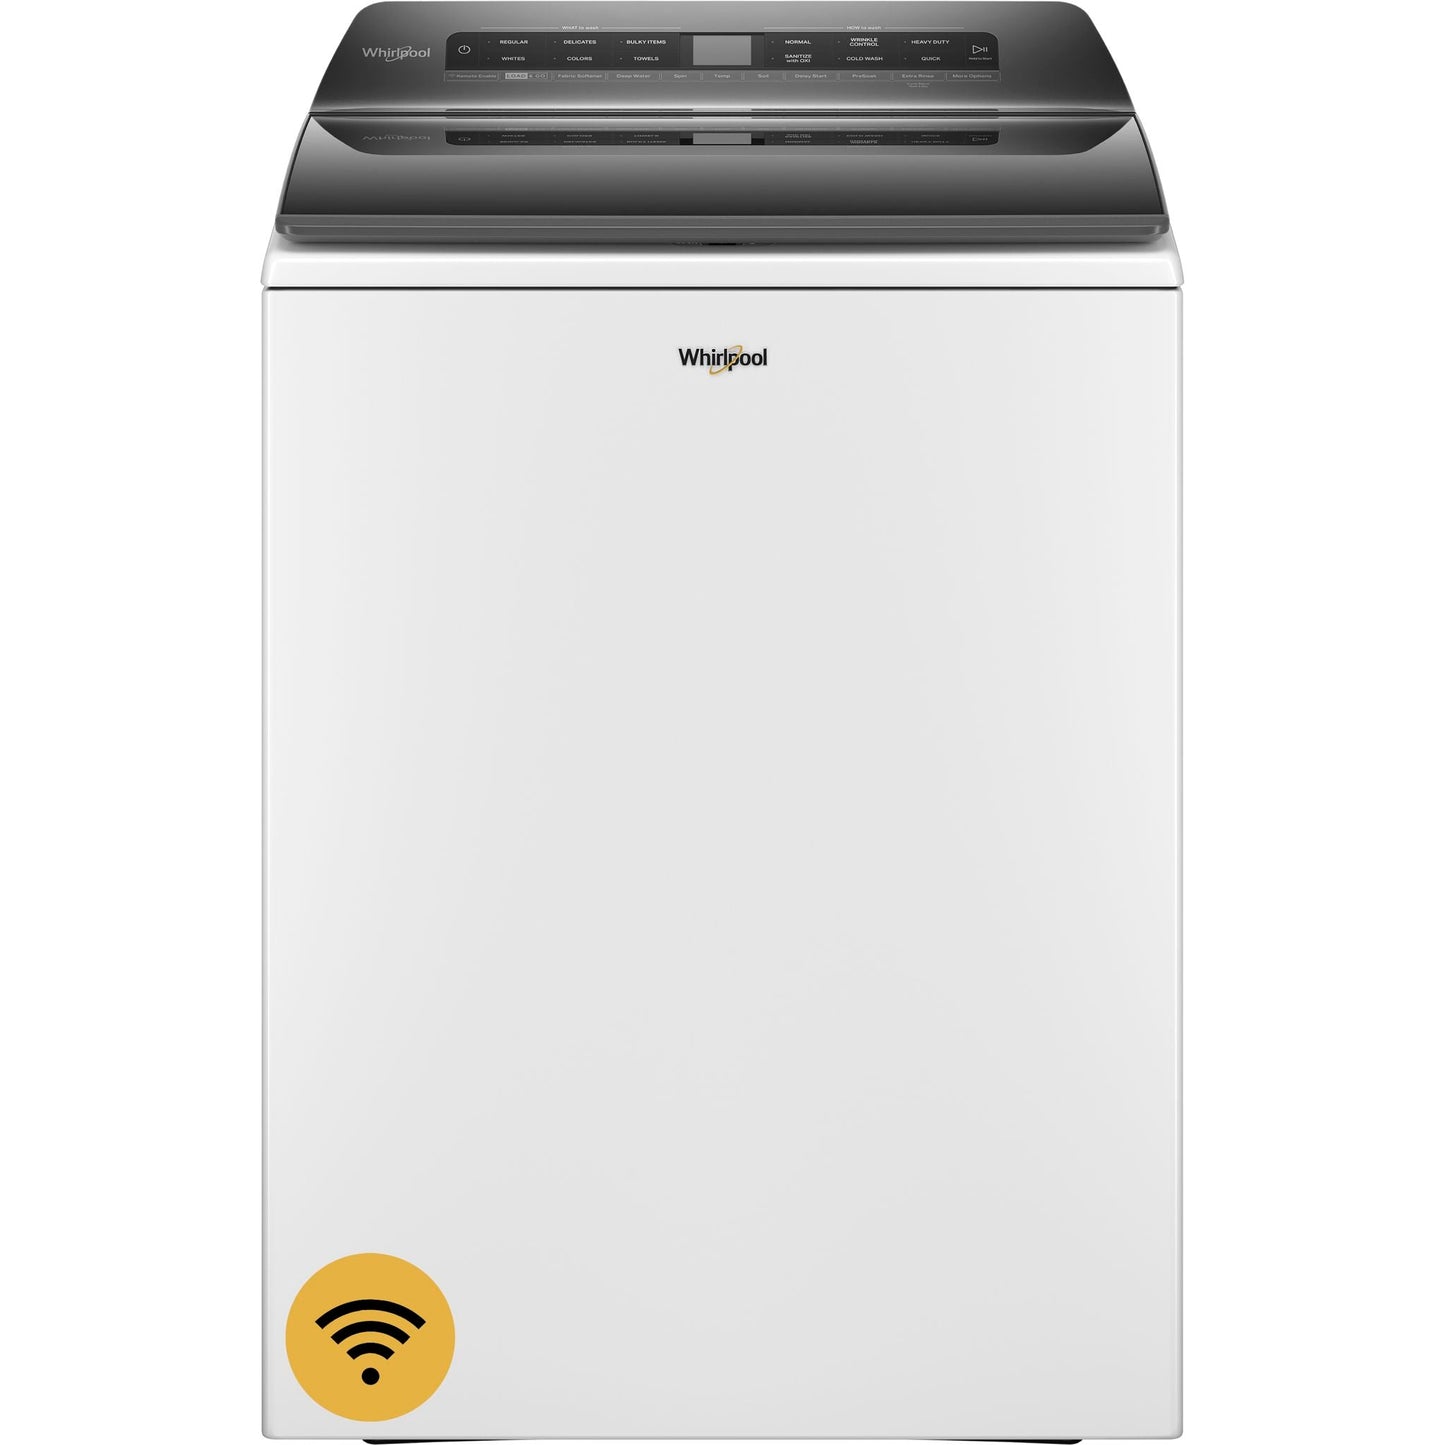 Whirlpool Top Load Washer (WTW6120HW) - White